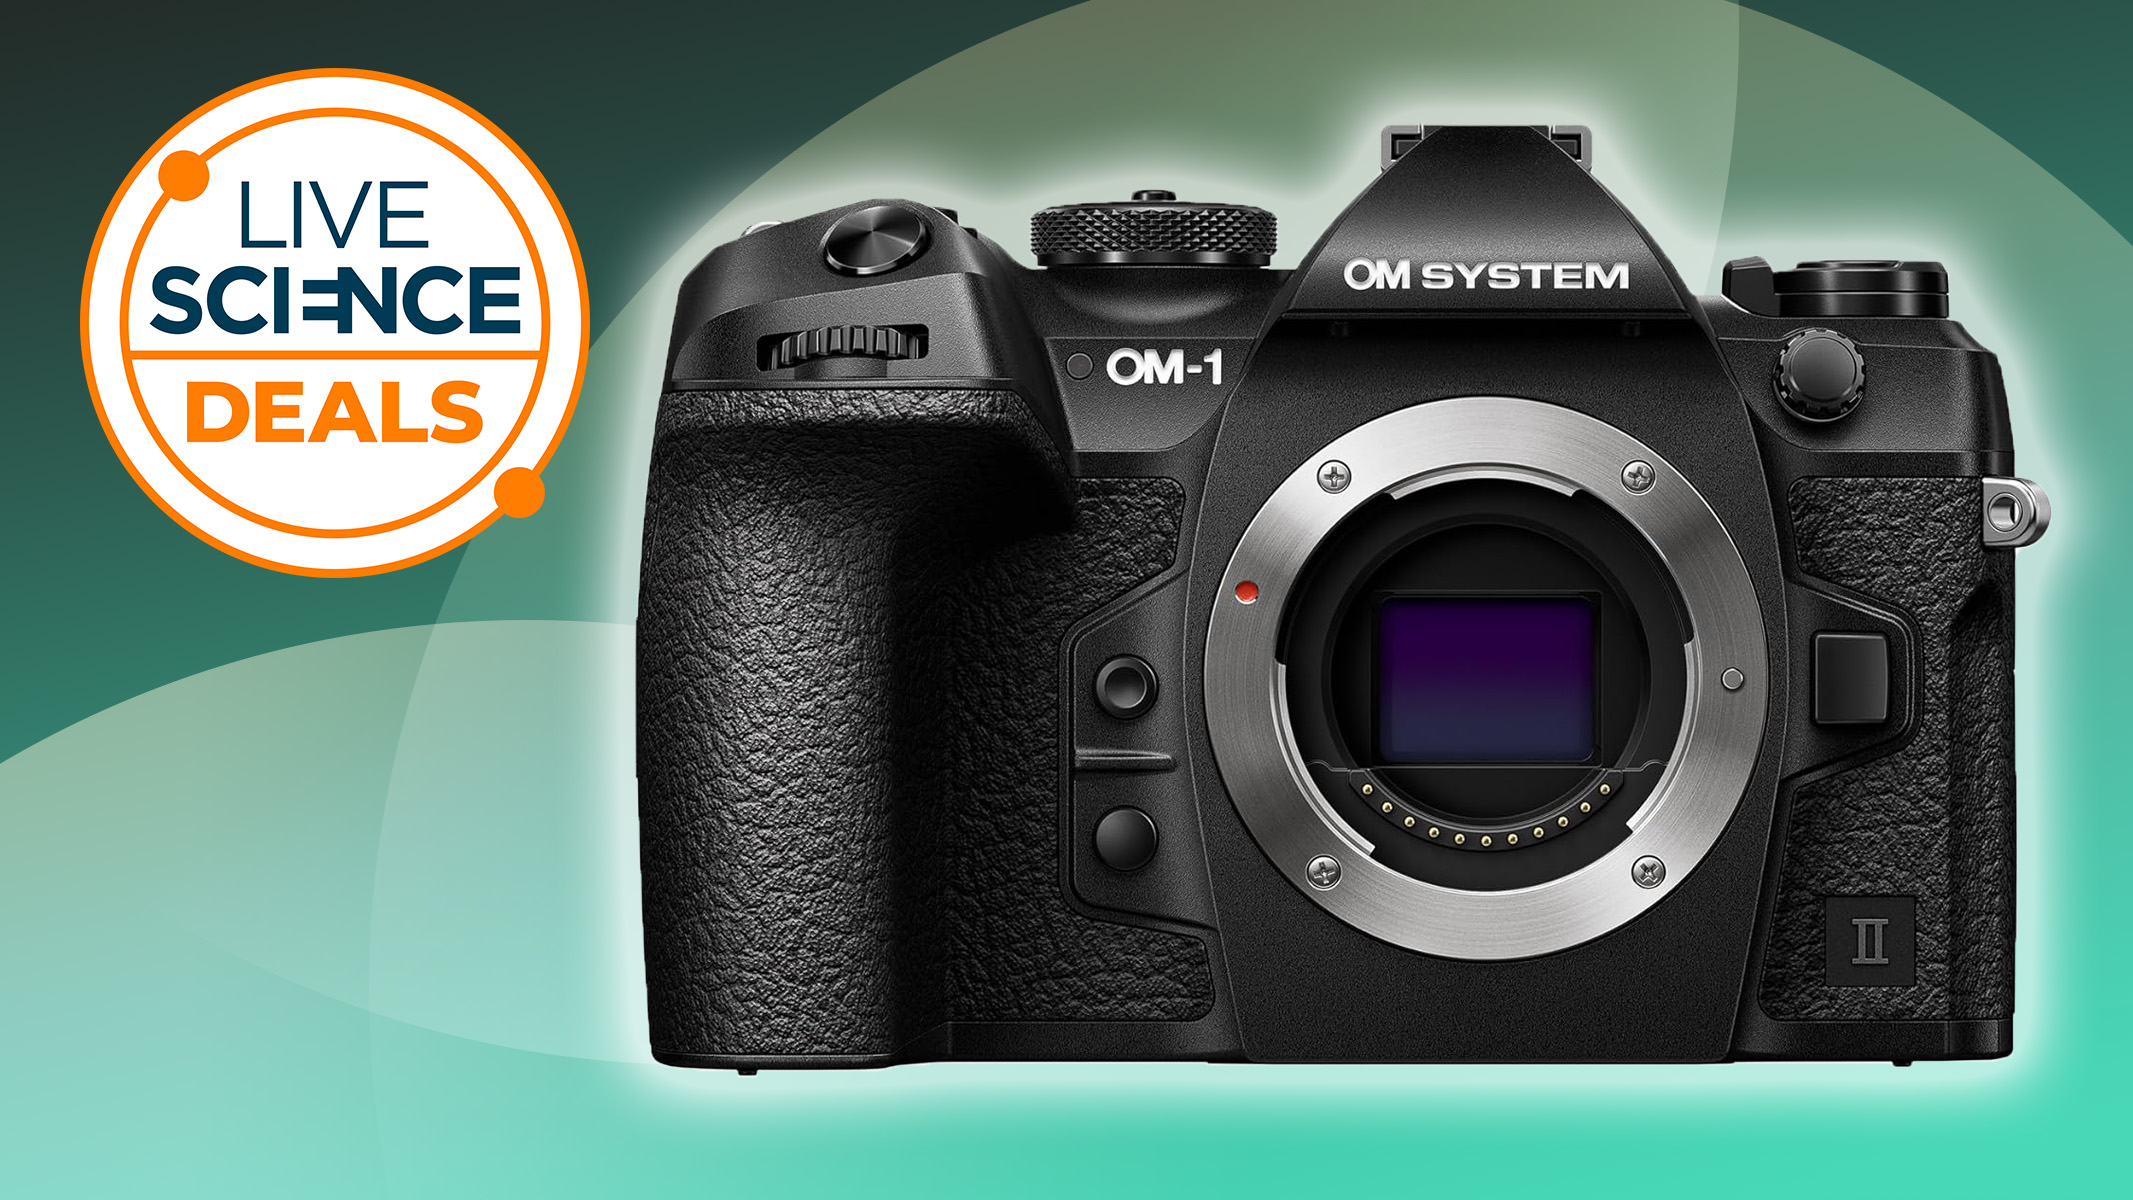  Save $300 on the new OM System OM-1 Mark II  